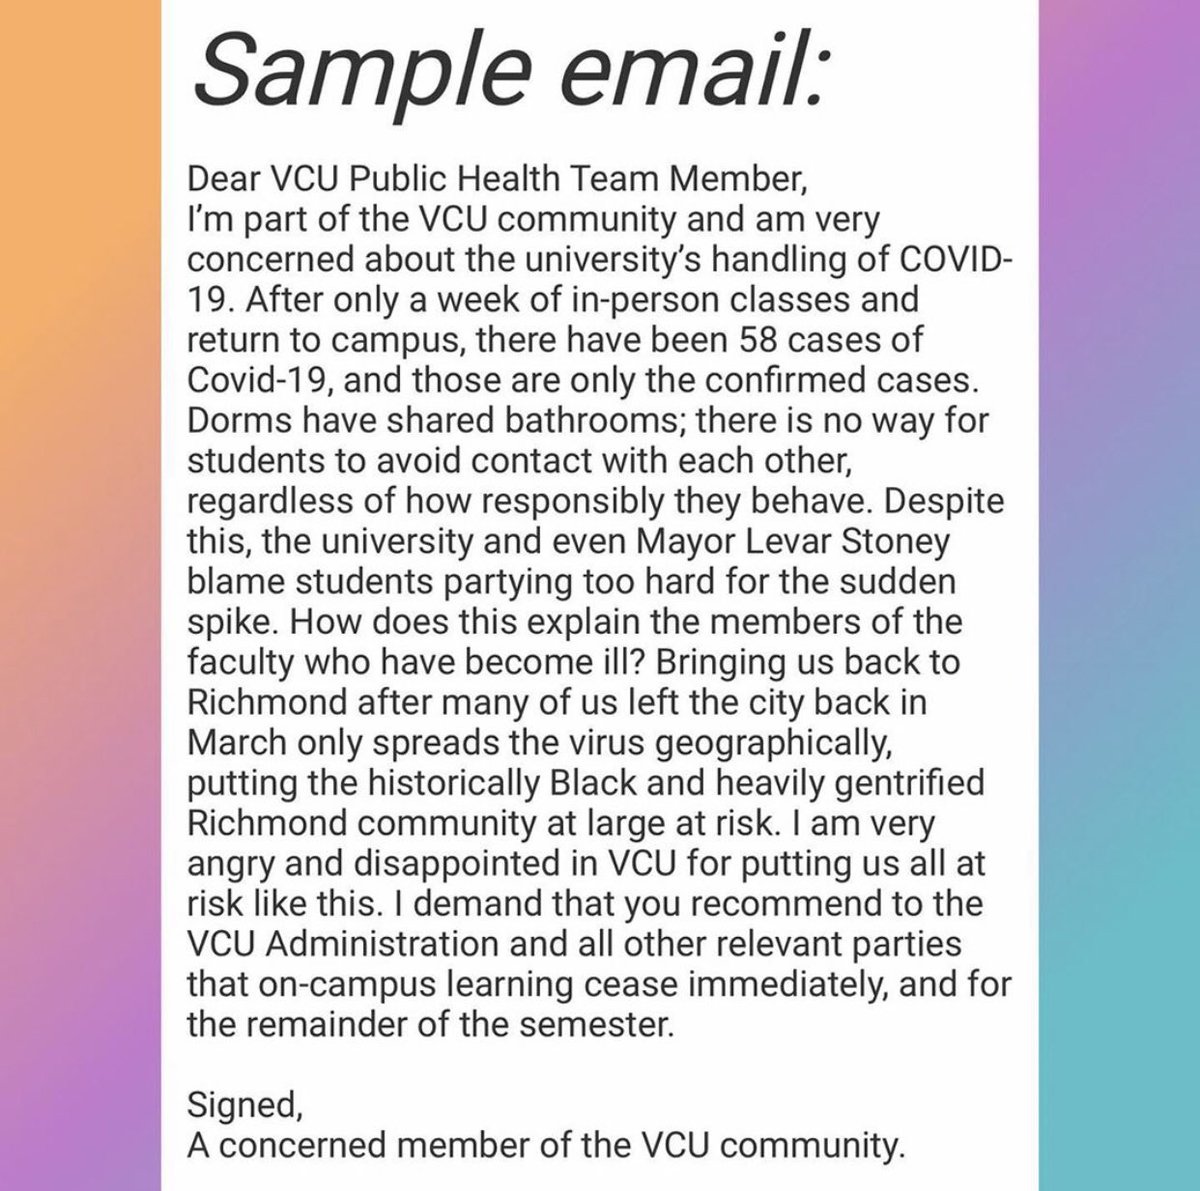 Already, we have seen cases rising exponentially putting our communities at risk. Now we are learn that Kallaco testing kits given to VCU, GMU, and W&M students are not approved by the FDA? Reply to this tweet and let us know what is happening on your campus w/ Covid